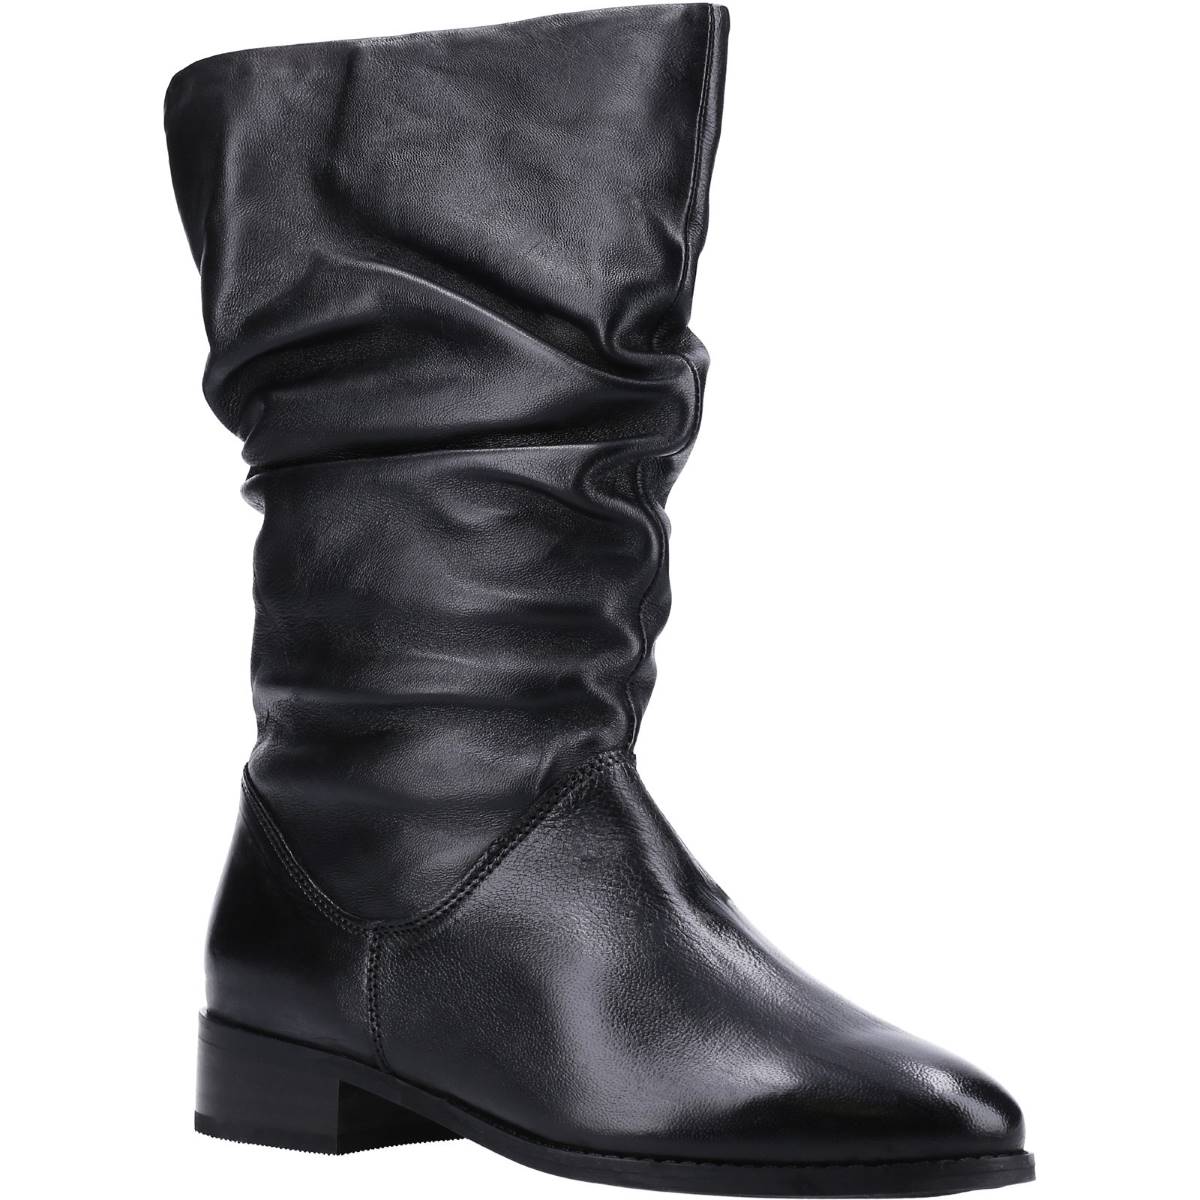 Dune London Rosalindas Black Womens ankle boots 73508510005484 in a Plain Leather in Size 3